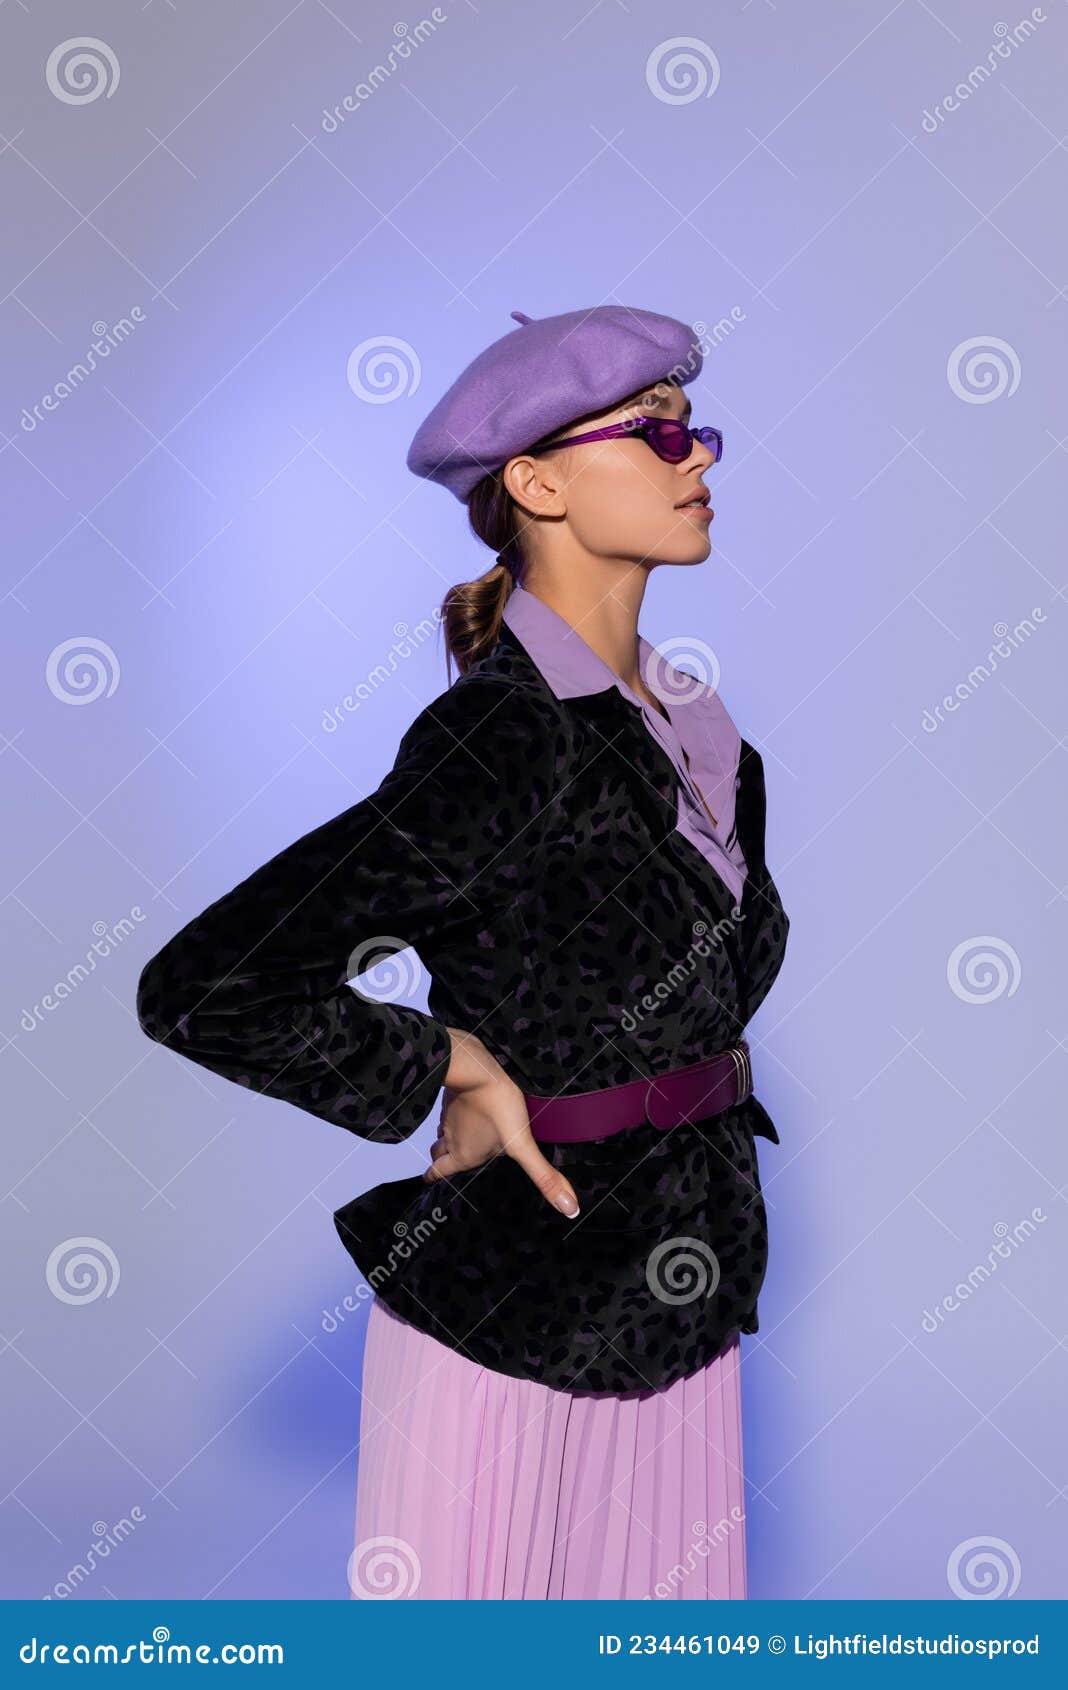 Trendy Woman in Beret, Sunglasses and Stock Image - Image of caucasian ...